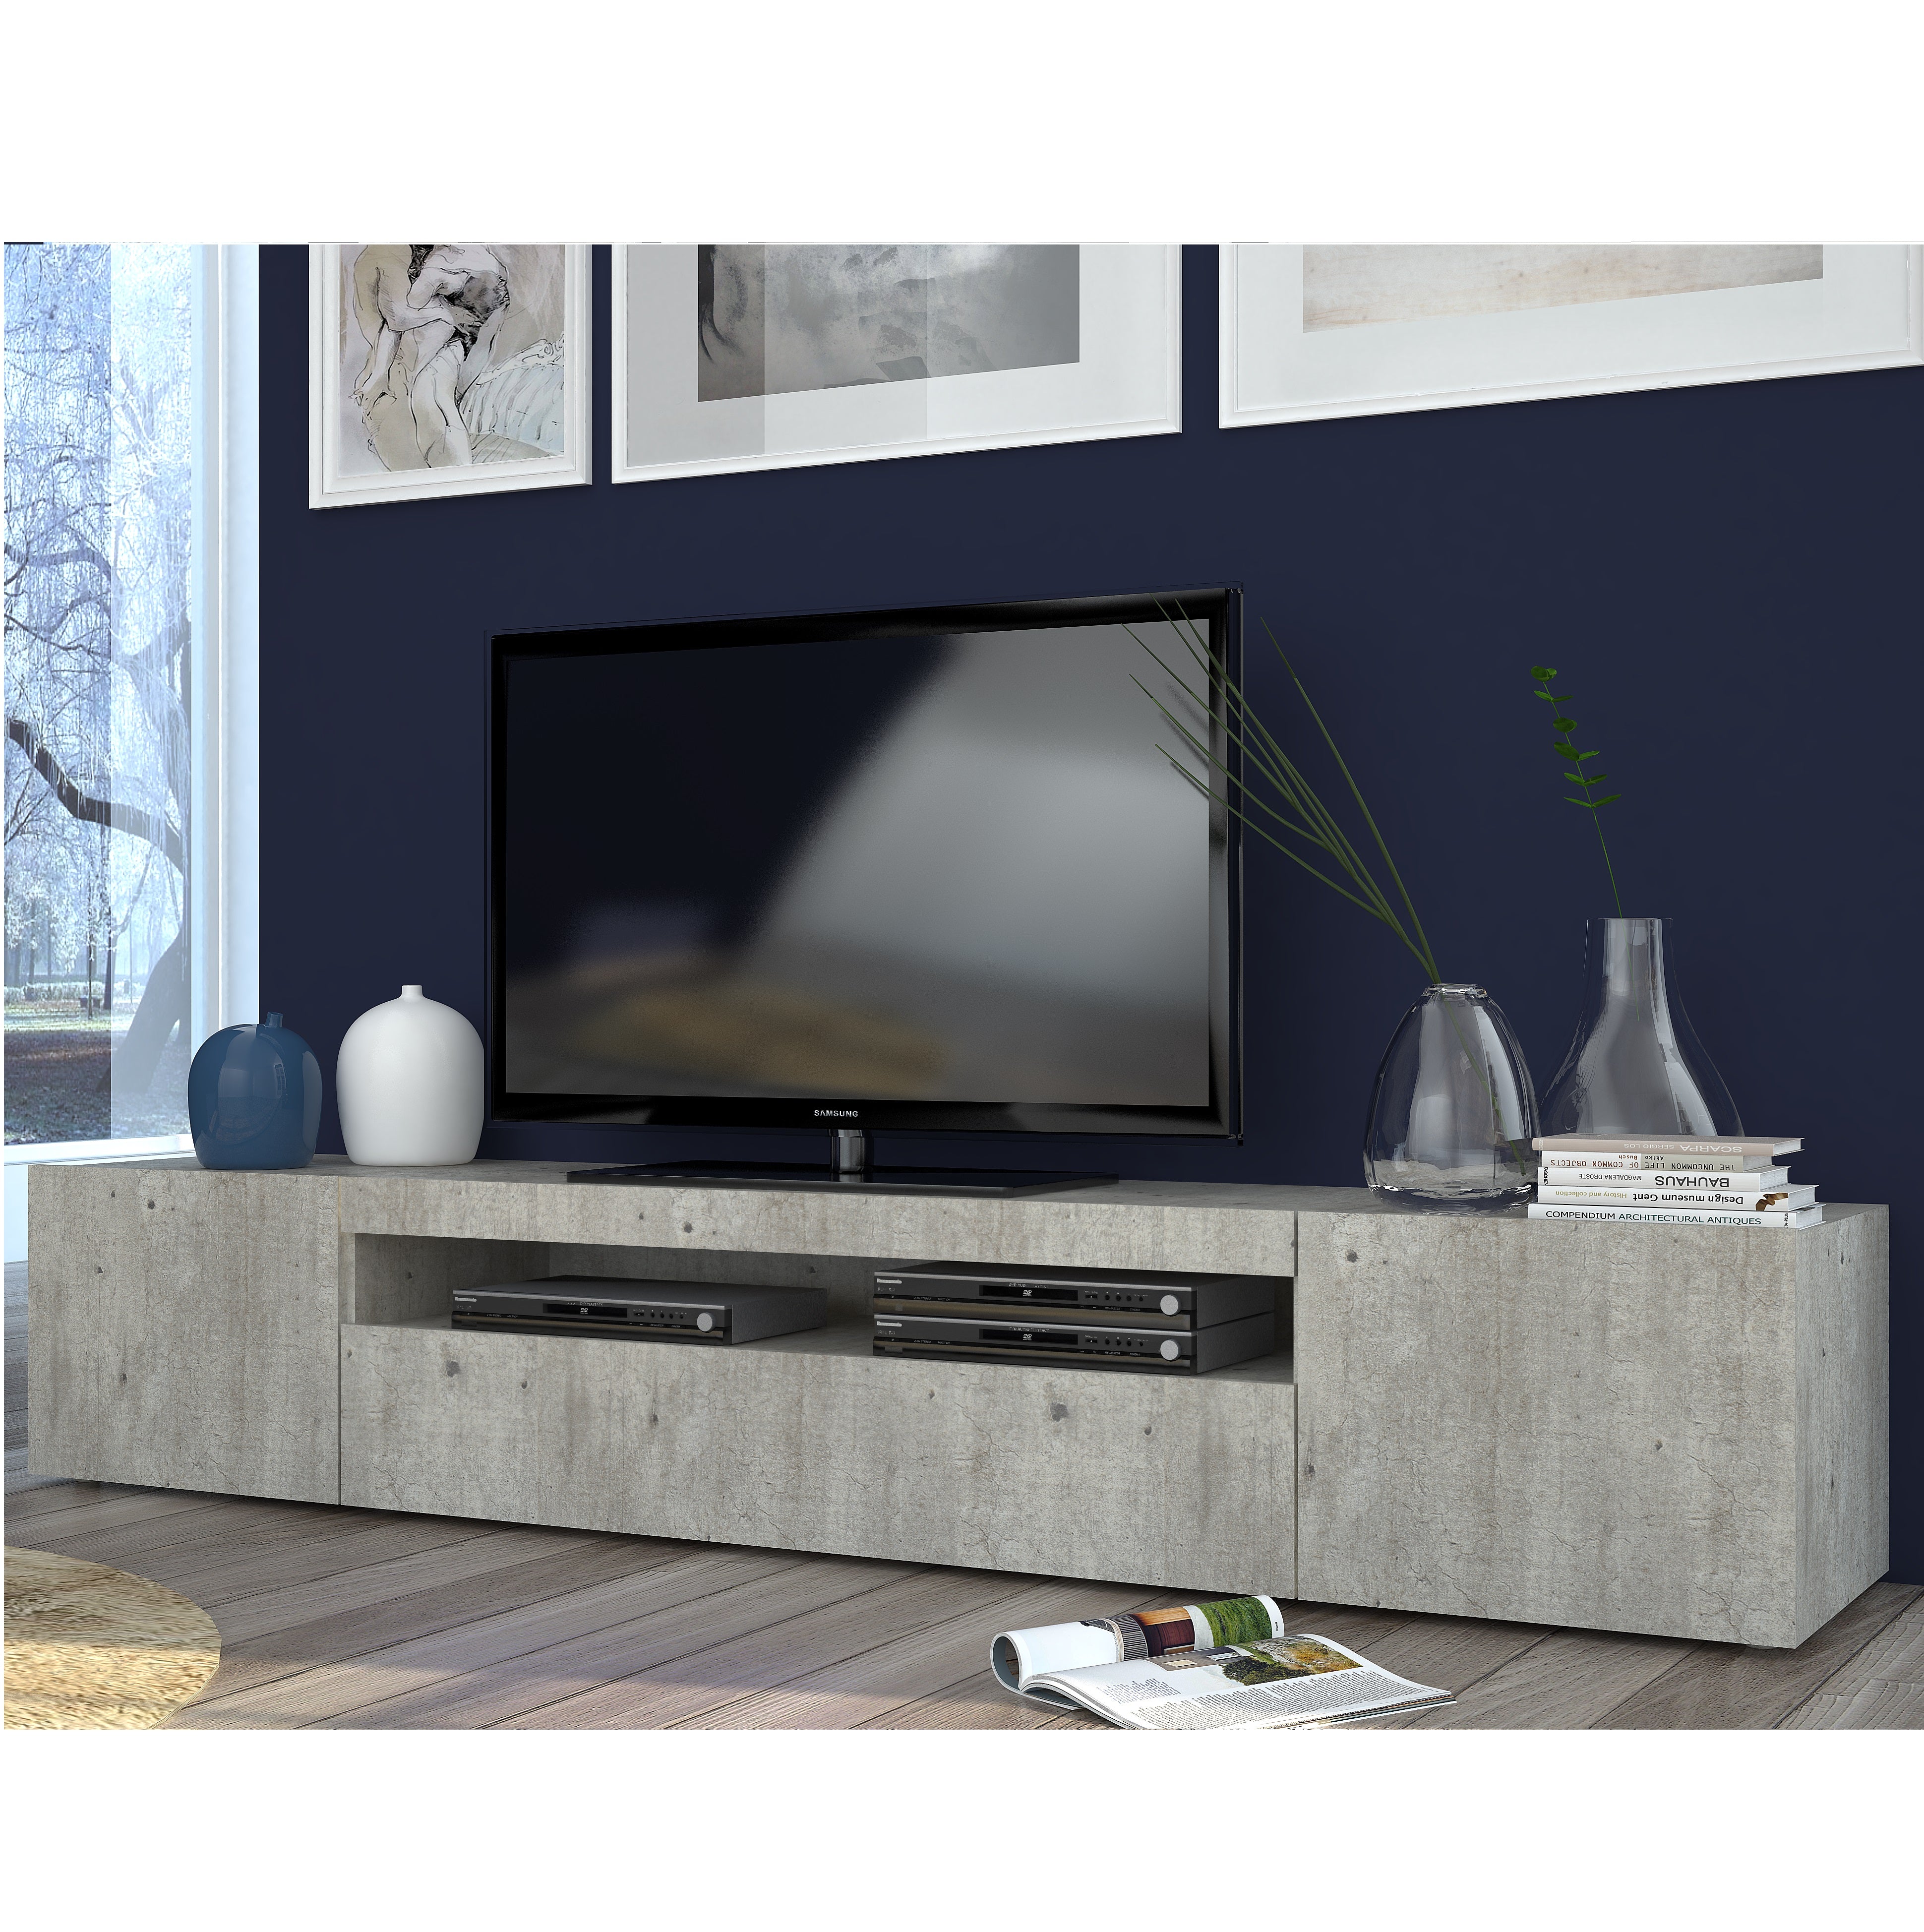 DAIQUIRI TV Stand 78.7inch, Multiple Finishes - Furniture.Agency